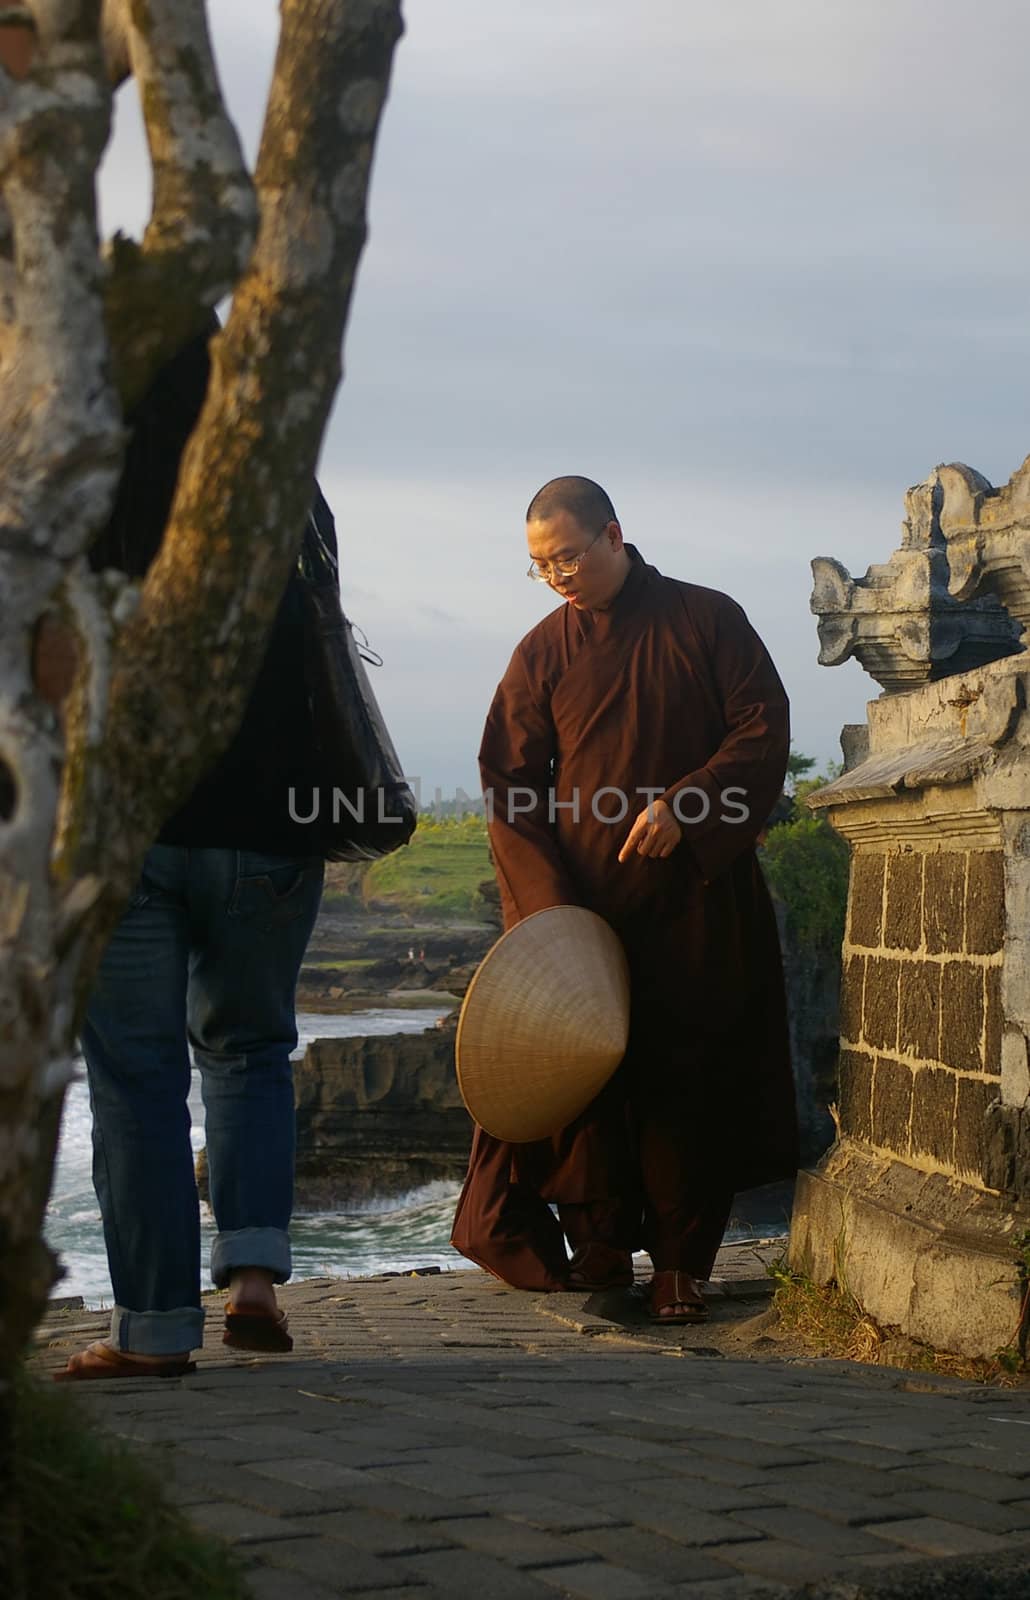 Buddhist monk at a Balinese temple by Komar